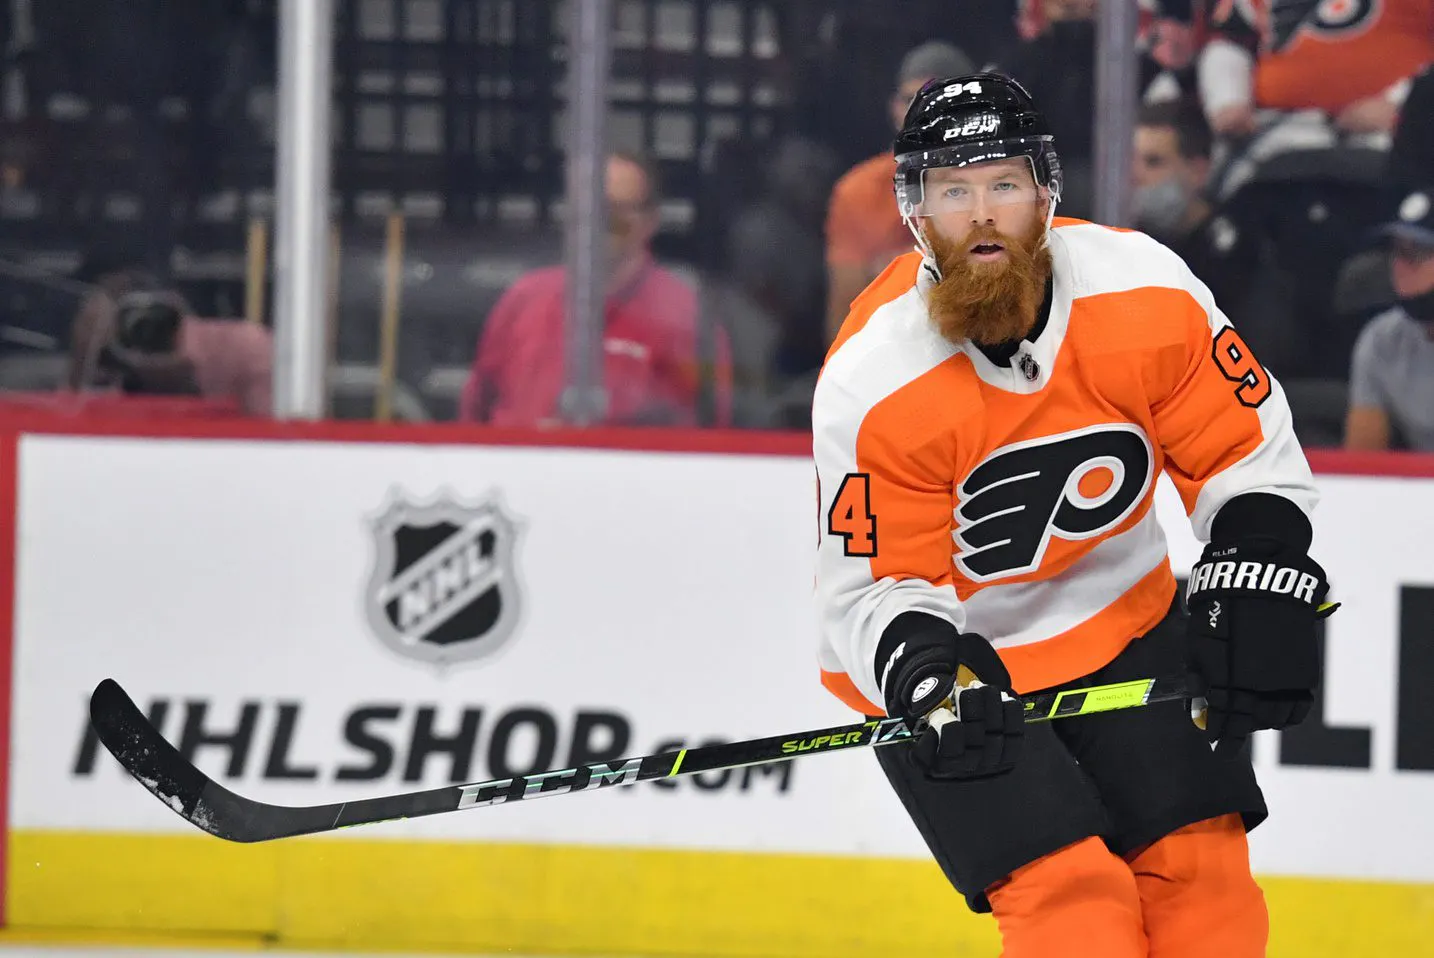 Ryan Ellis will miss 4-to-6 weeks with a lower-body injury